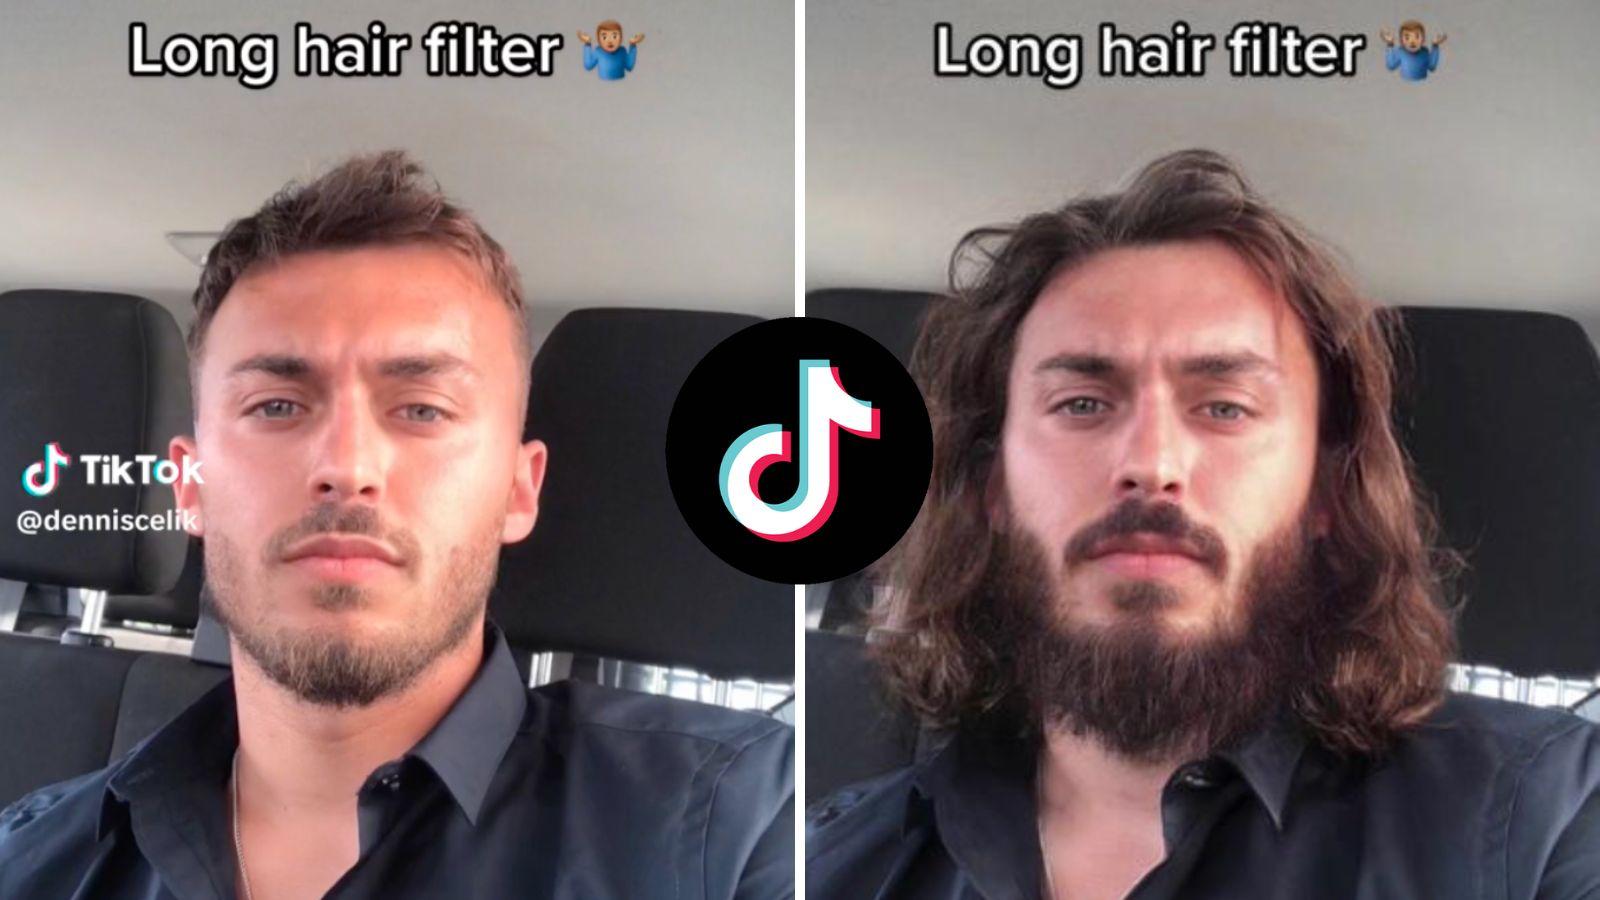 Man using the long hair filter on himself